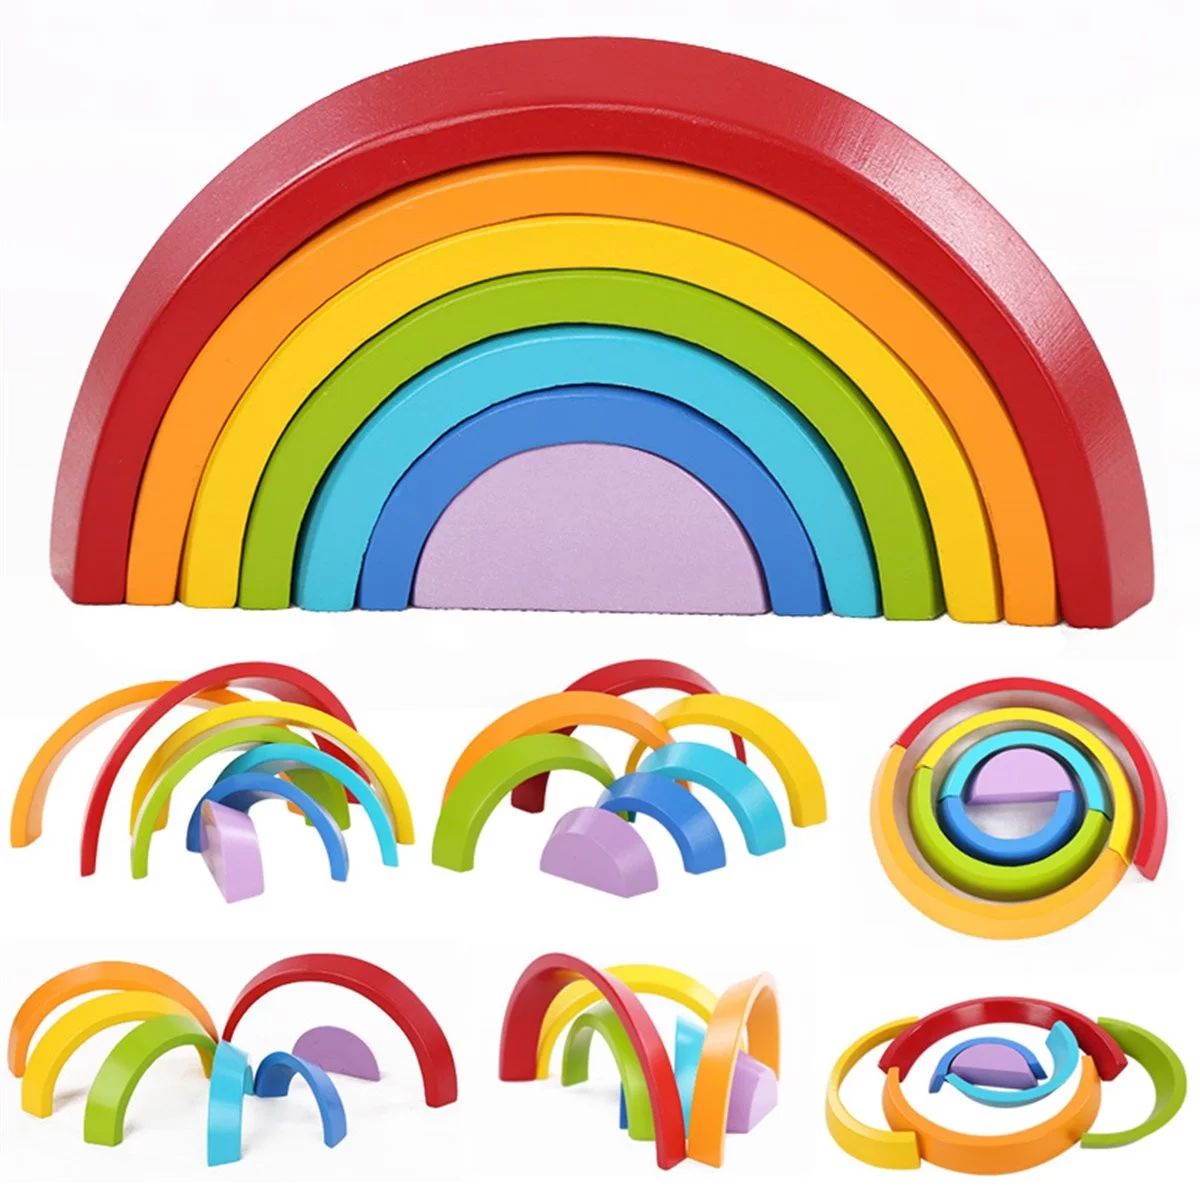 7 Color Wooden Stacking Rainbow Shape Brick Kids Childrens Educational Toy Set | Walmart (US)